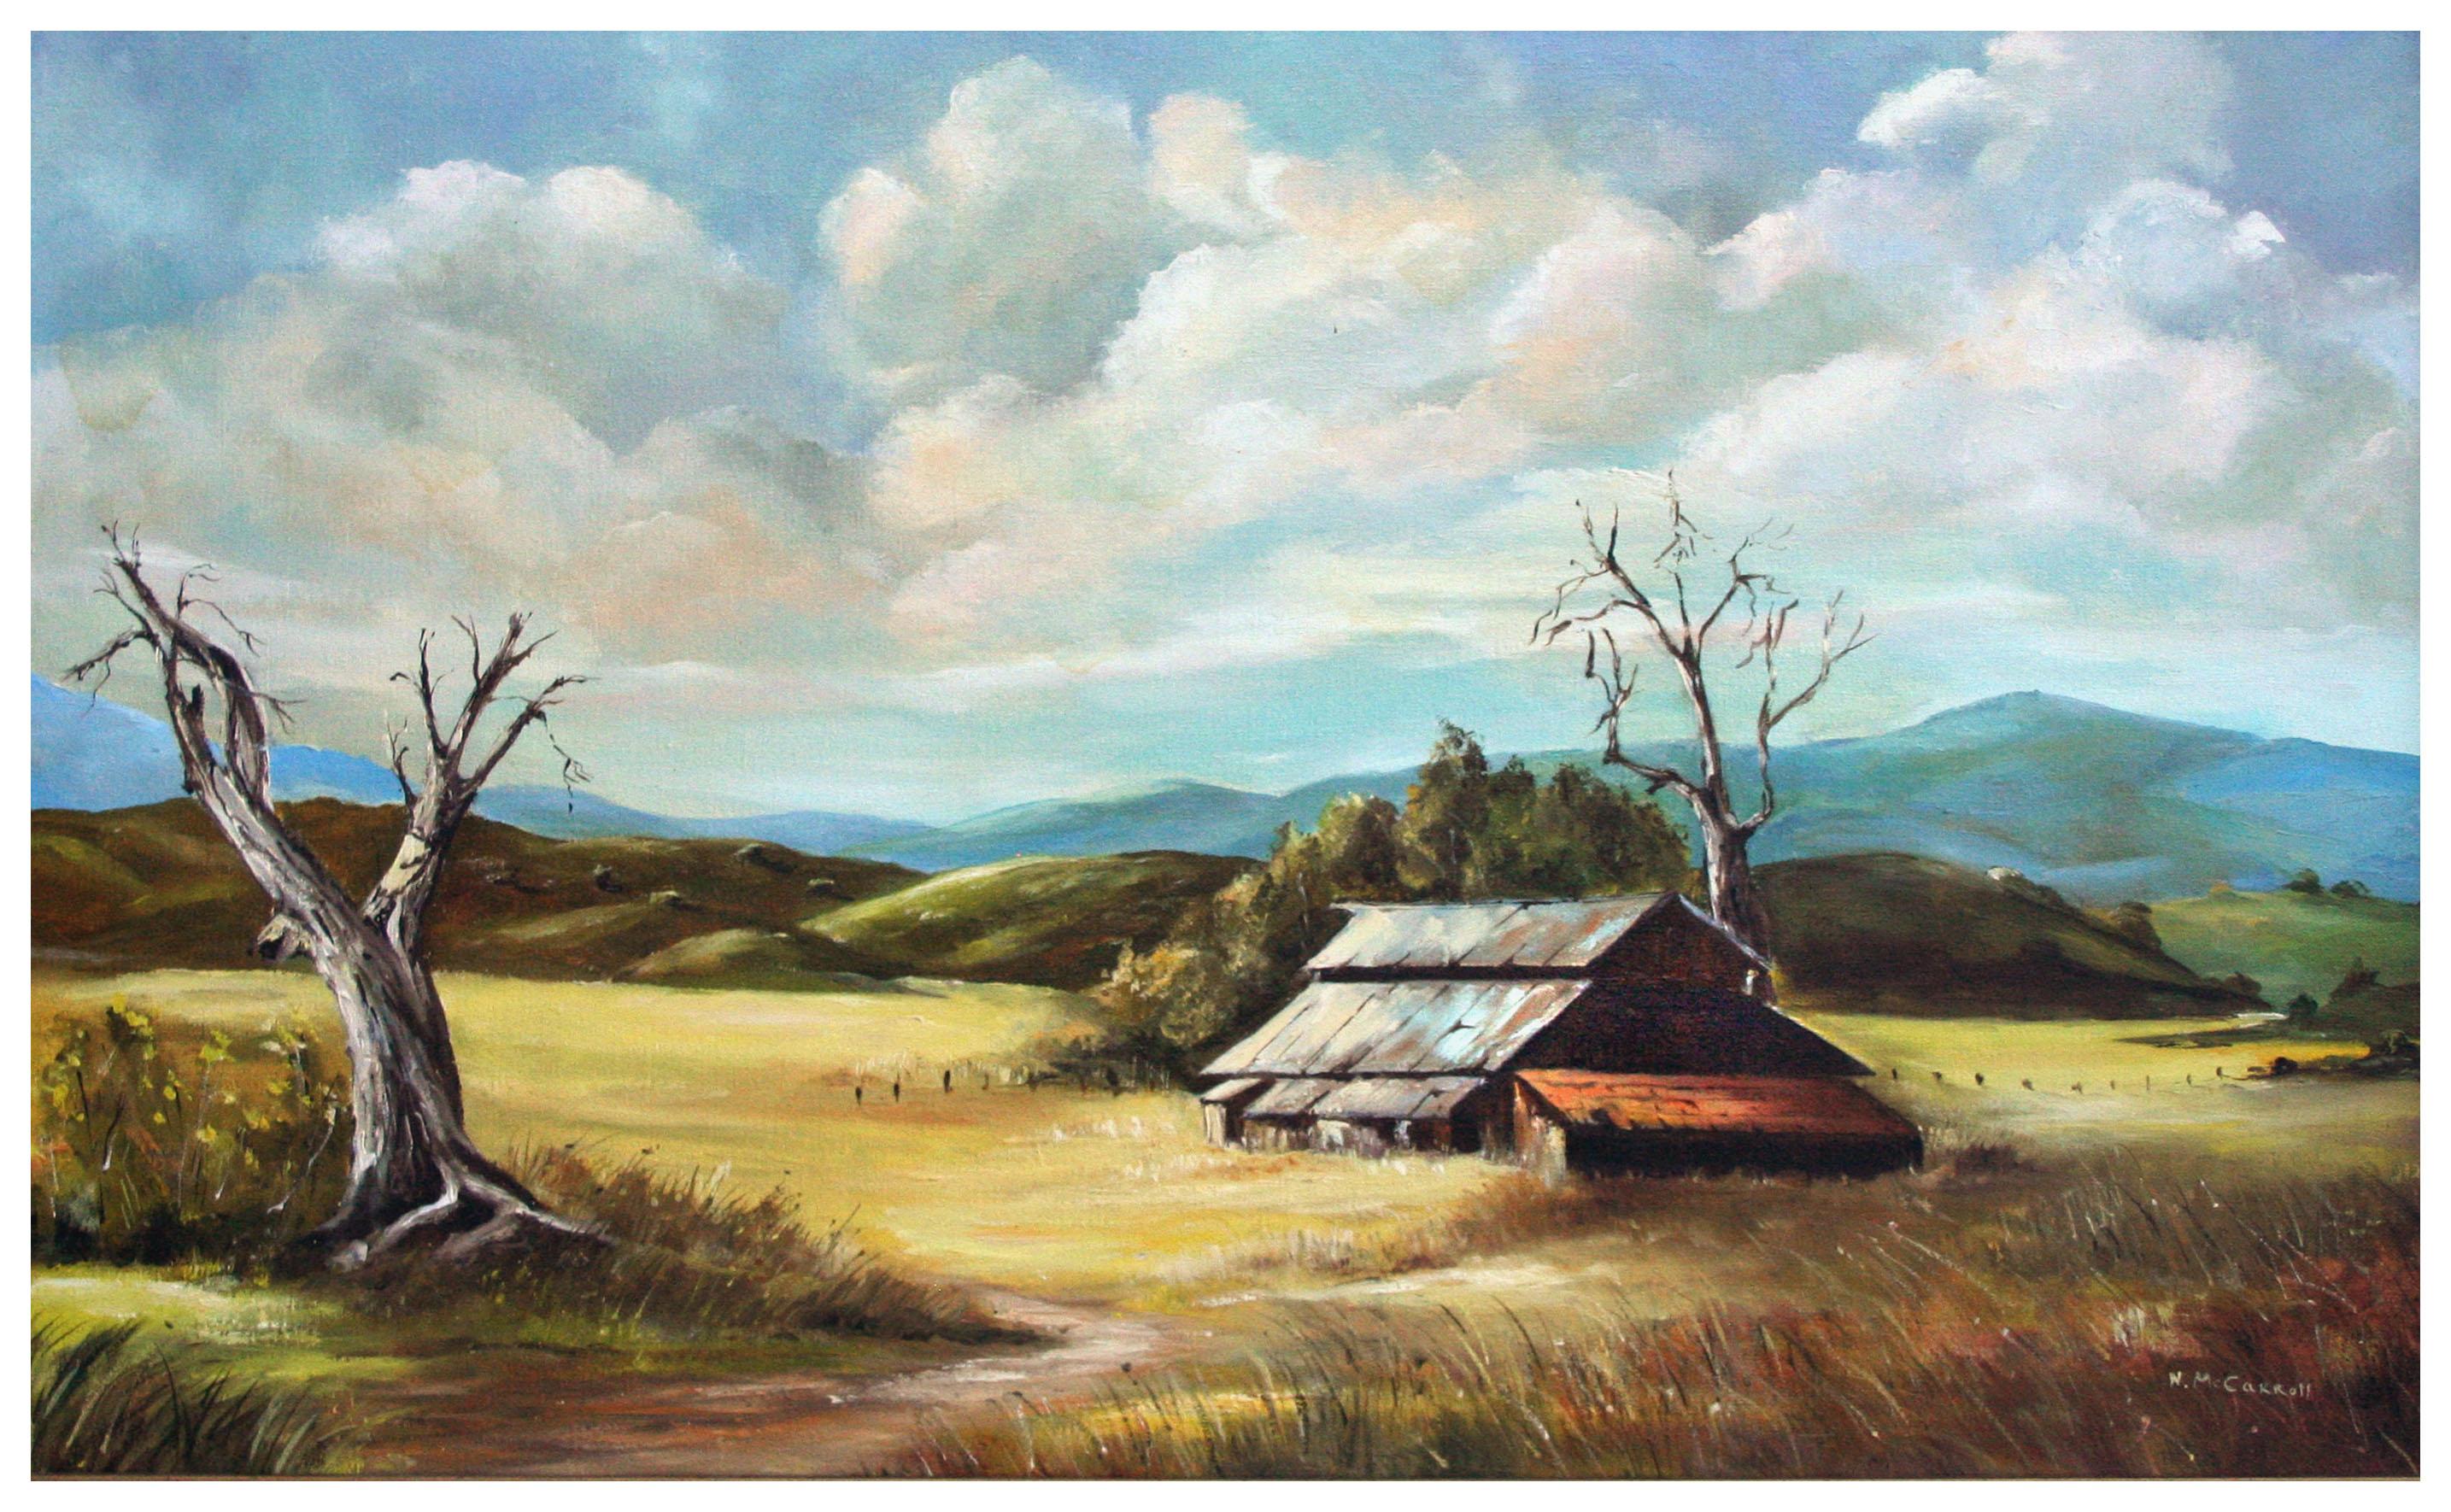 Vintage California Gold Country Landscape with Barn  - Painting by N. McCarroll